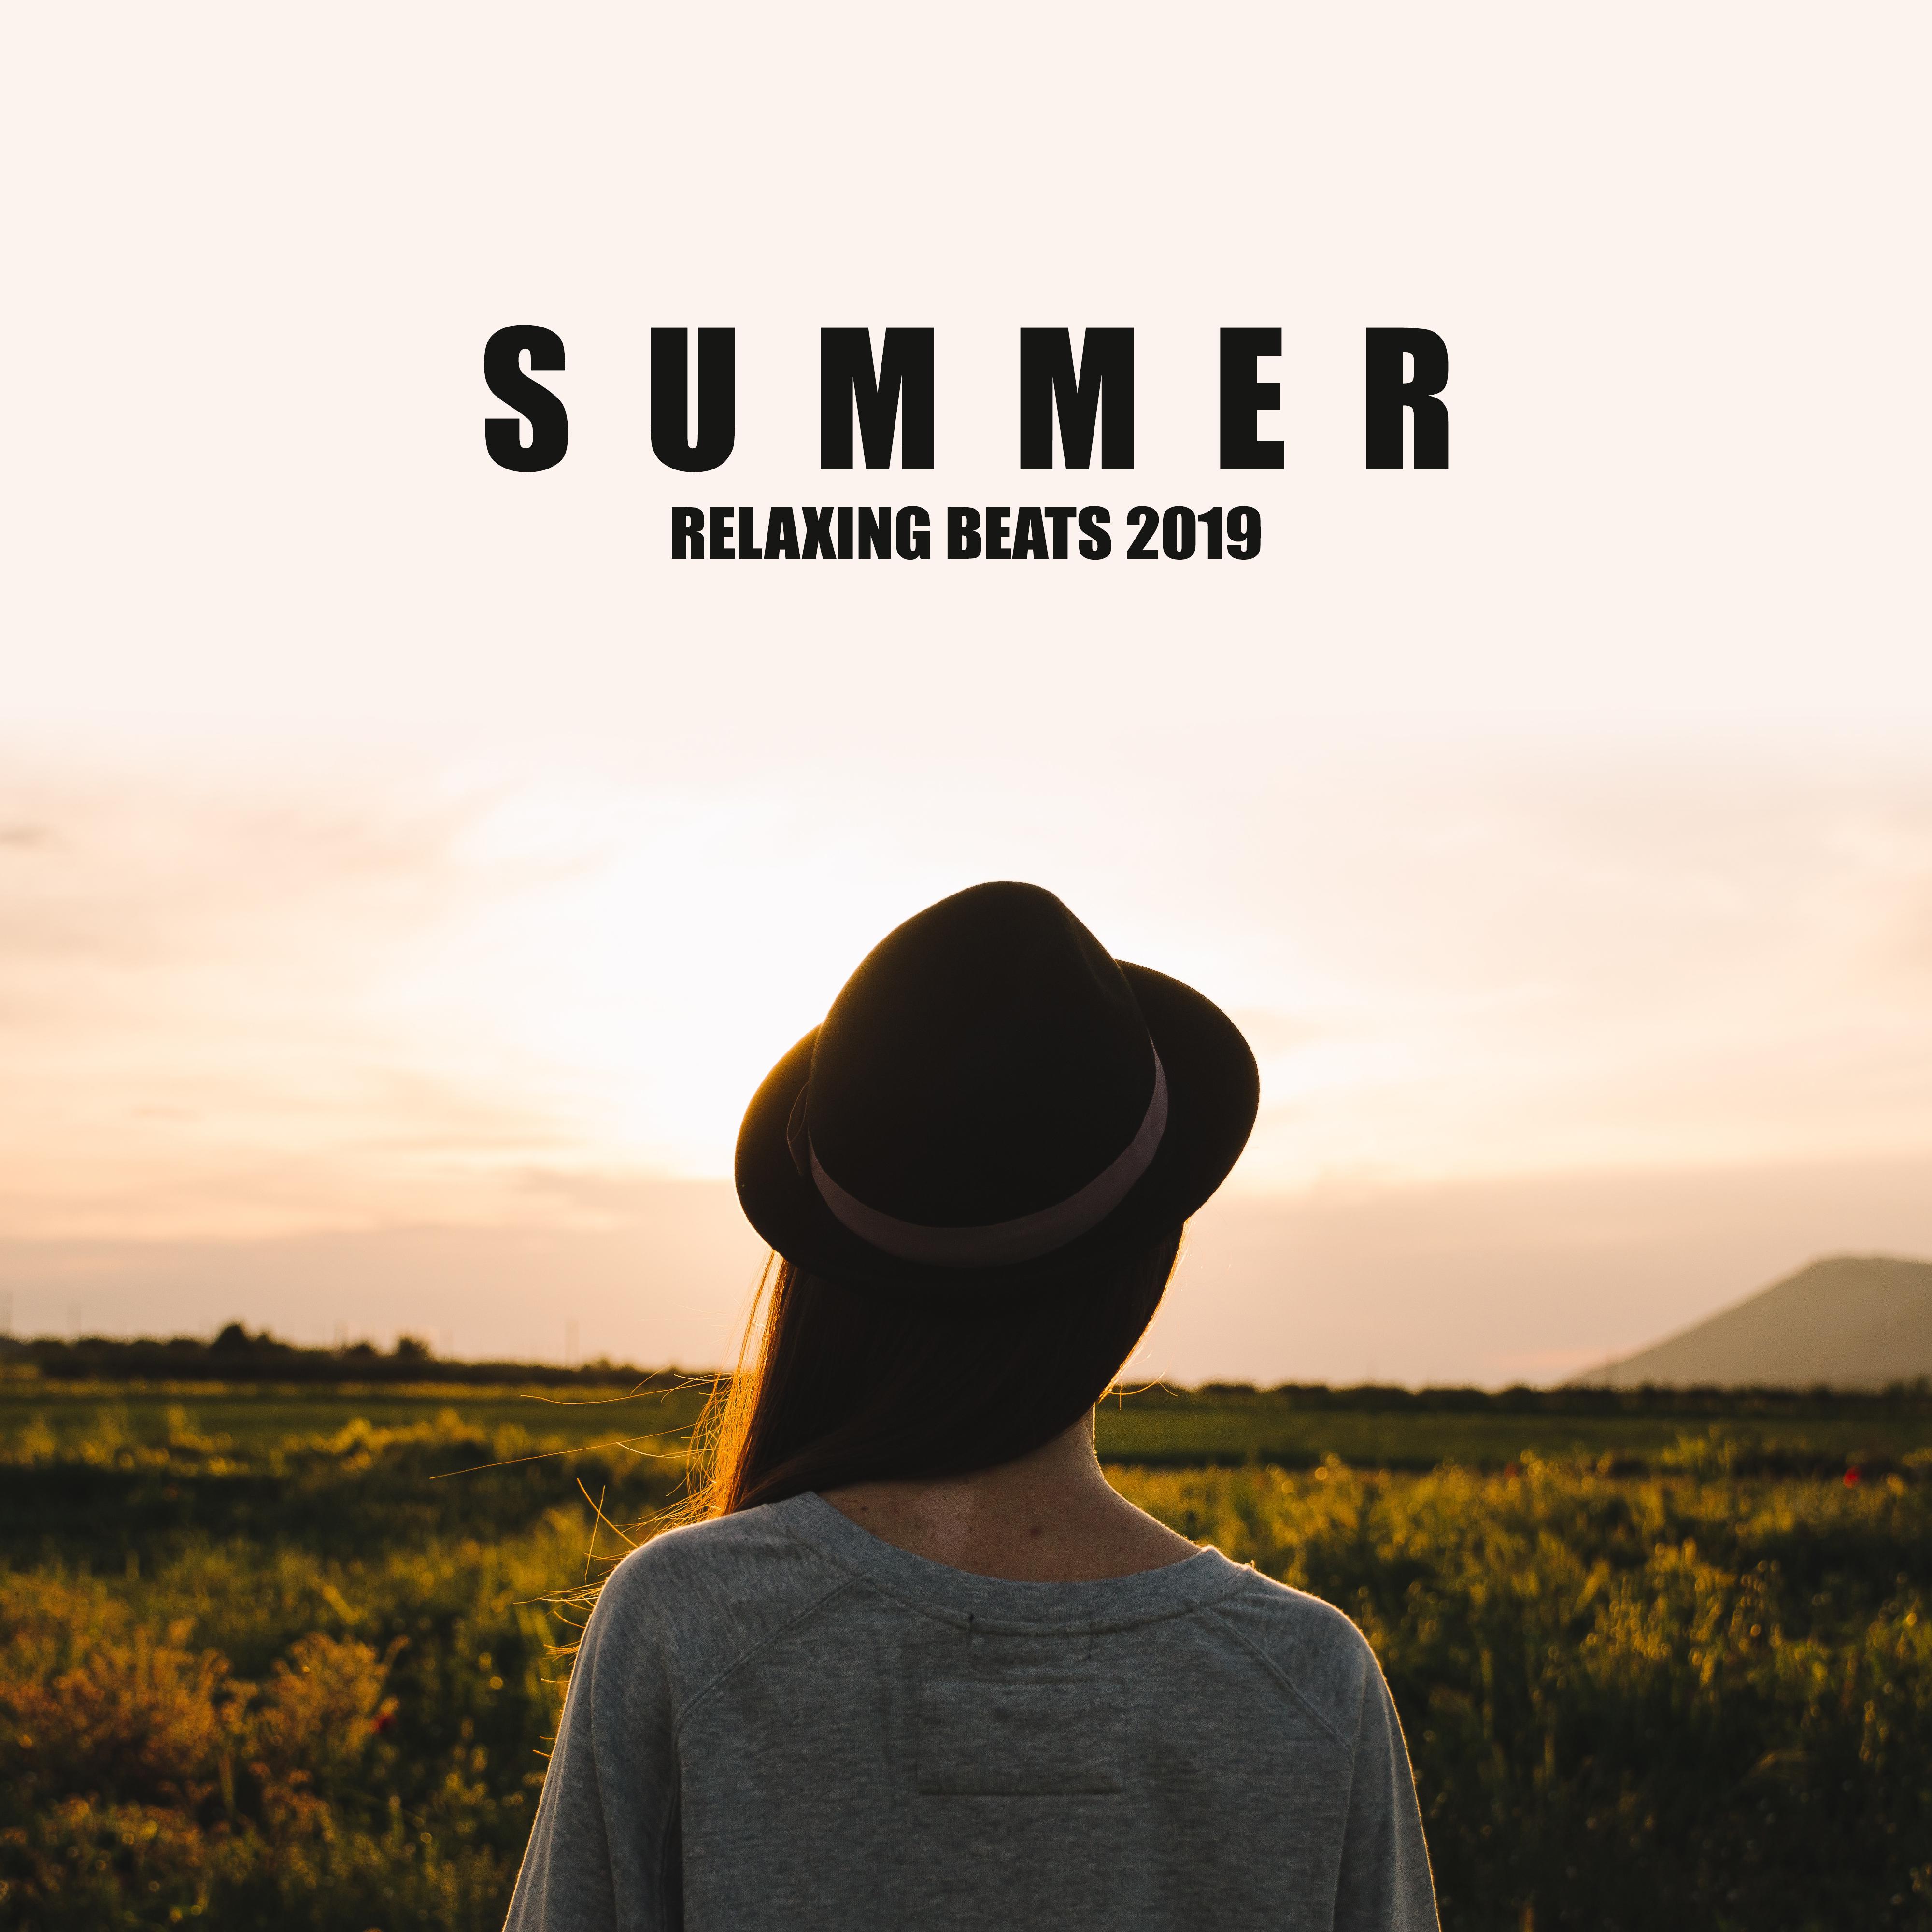 Summer Relaxing Beats 2019  Compilation of Best Chillout Holiday Tracks for Beach Relaxation  After Party Rest at Home